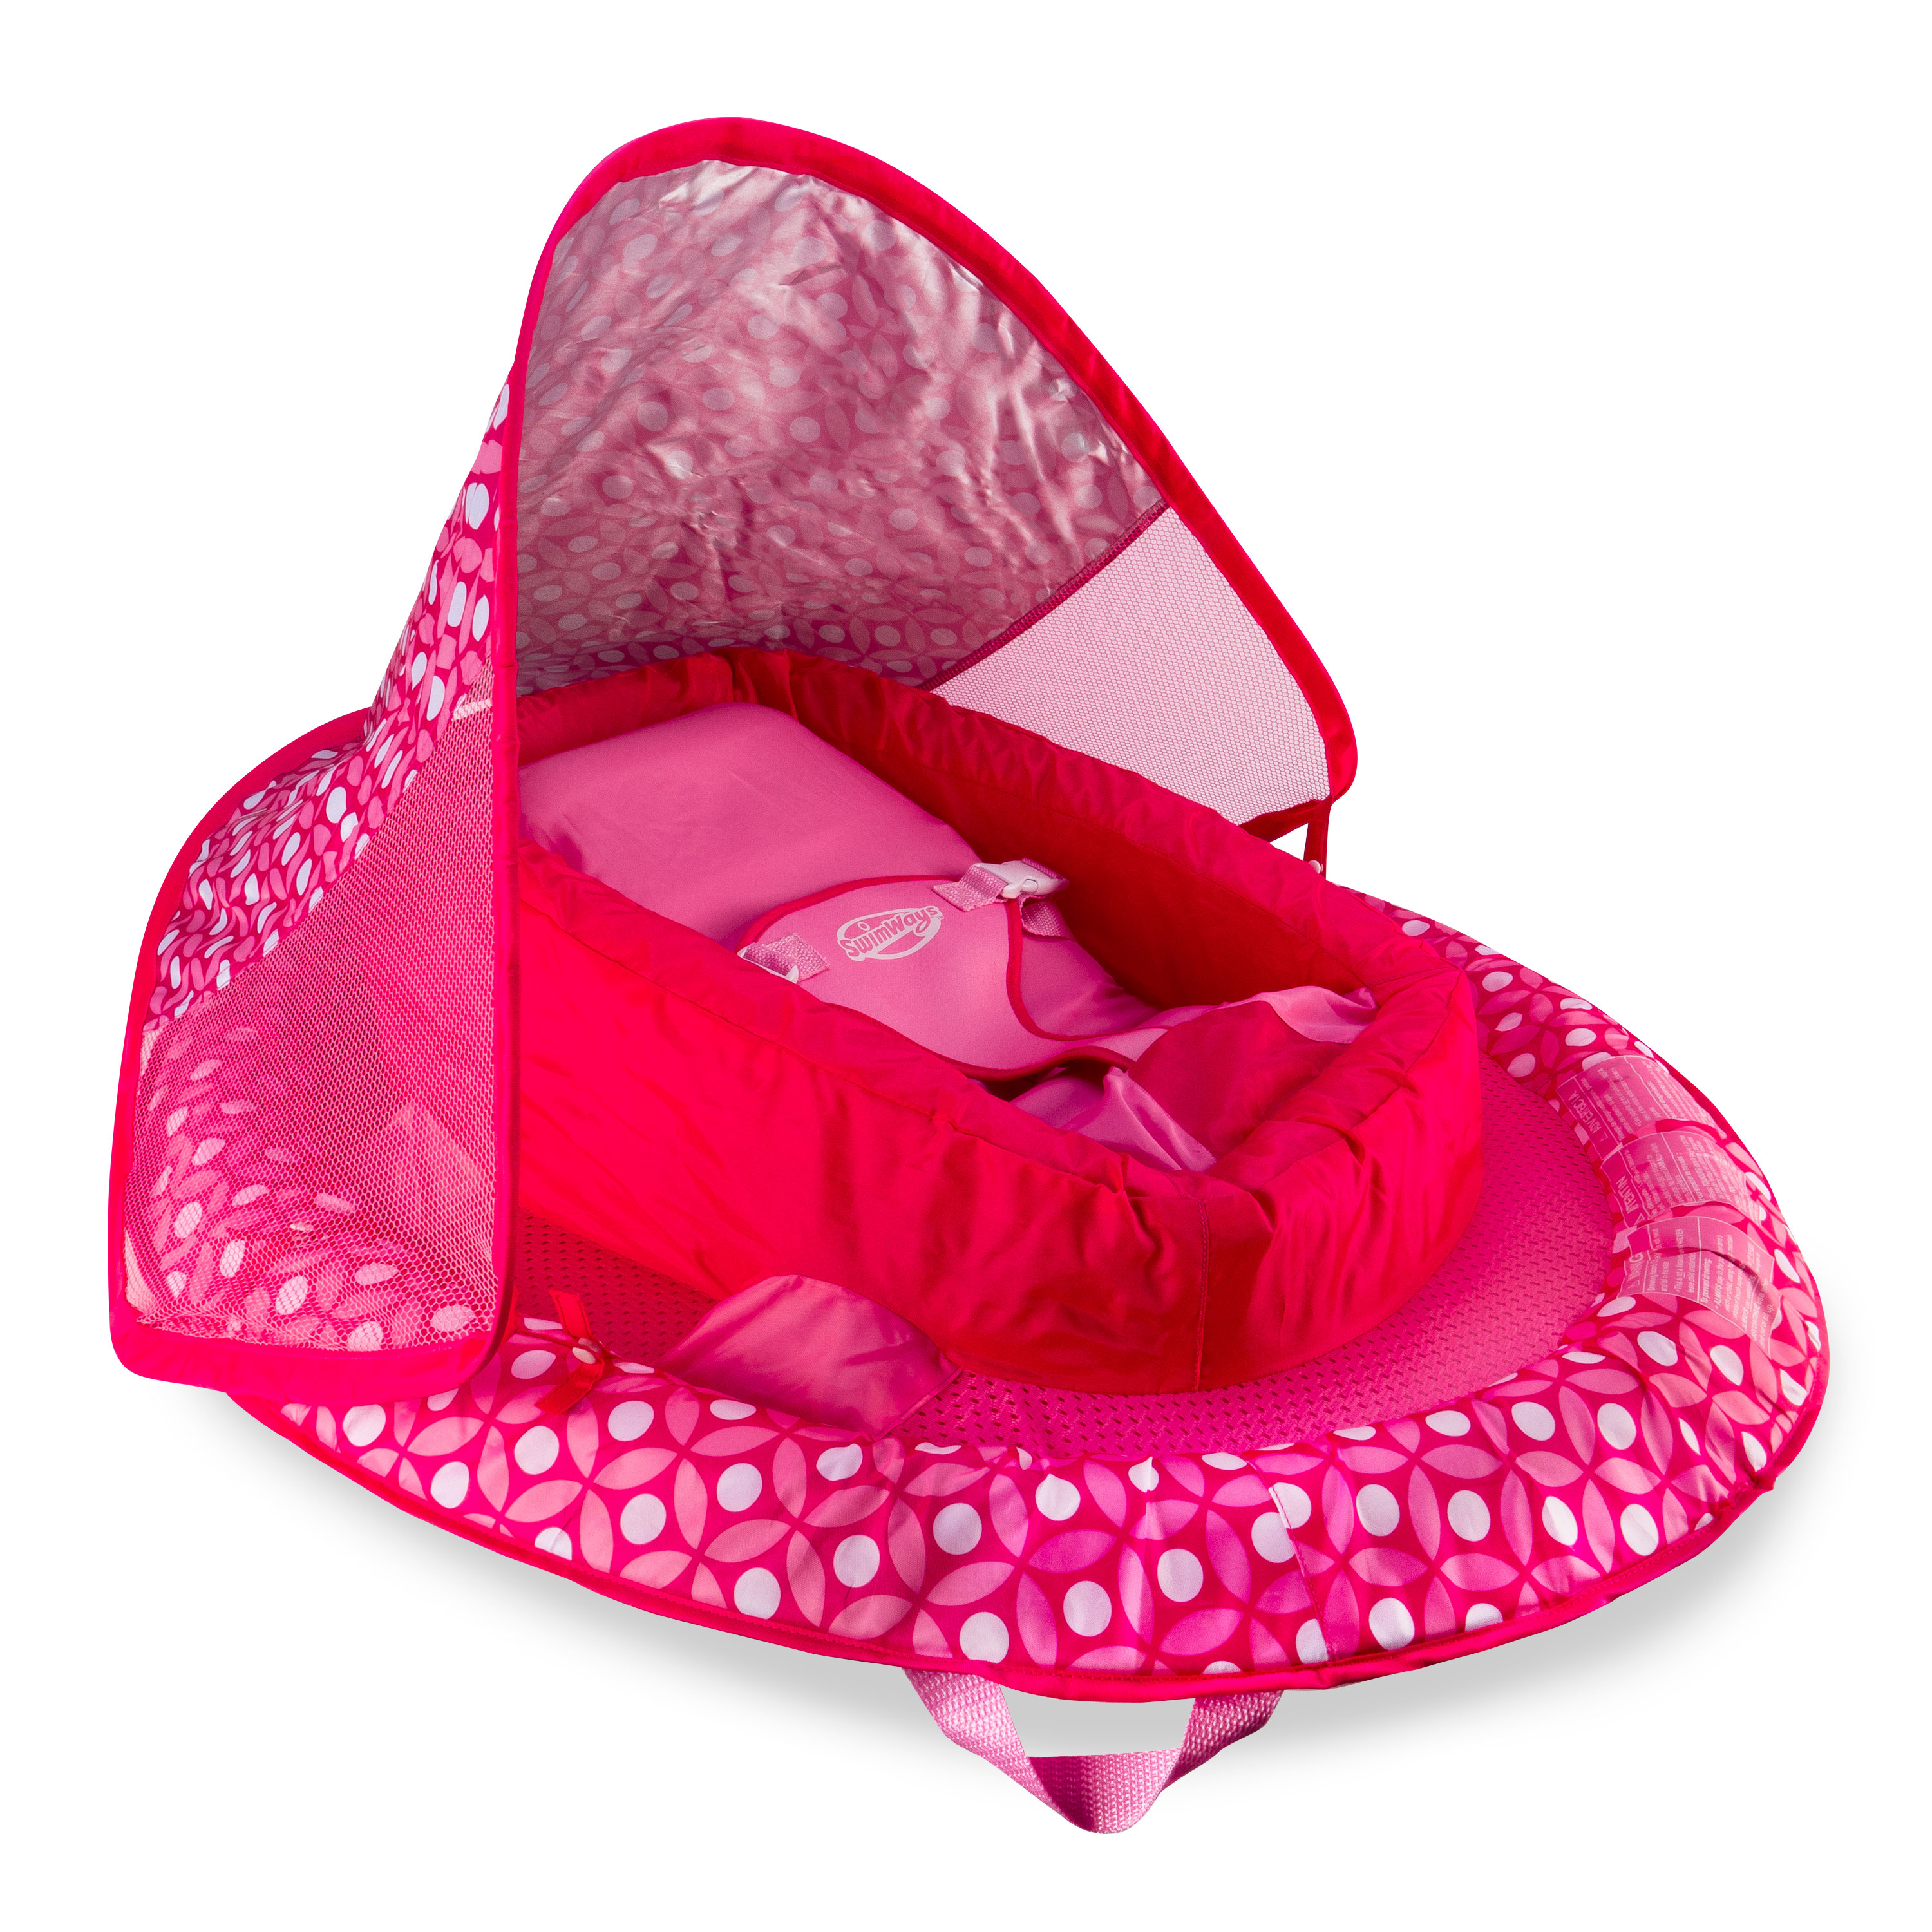 SwimWays Infant Baby Spring Float with Removable Sun Canopy - Pink